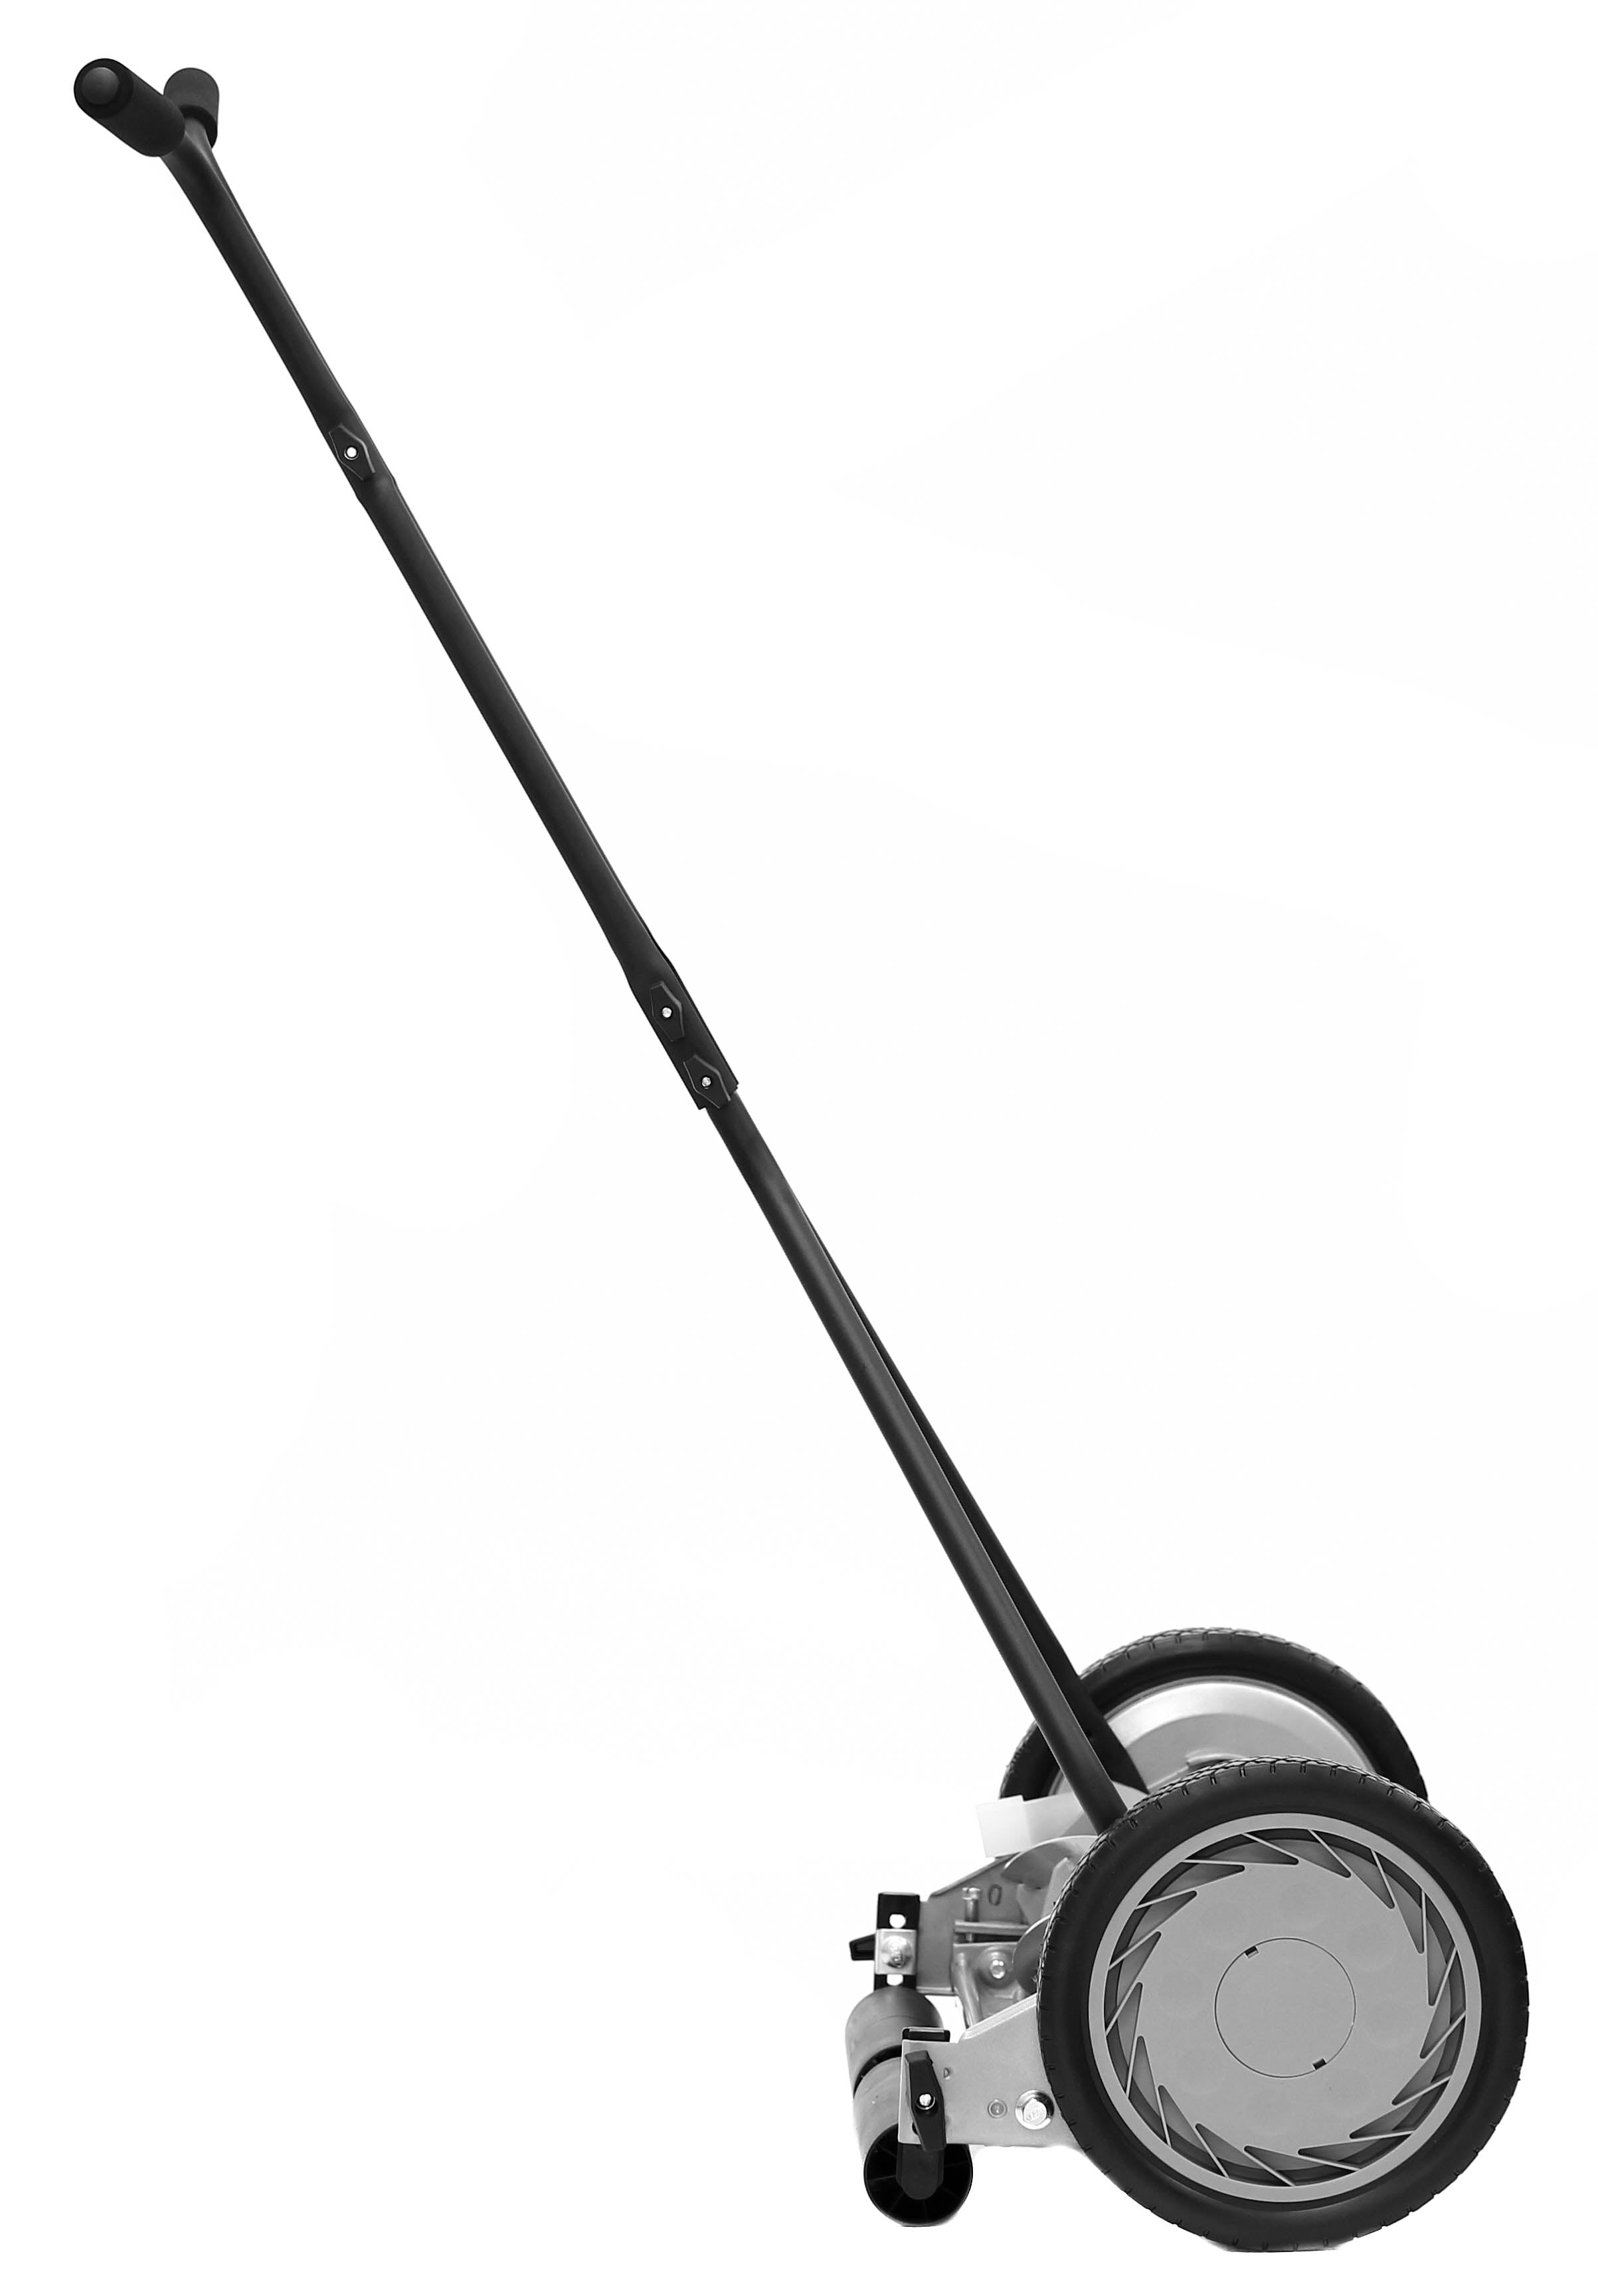 Great States 16 Manual Reel Mower with Sharpening Kit – American Lawn Mower  Co. EST 1895